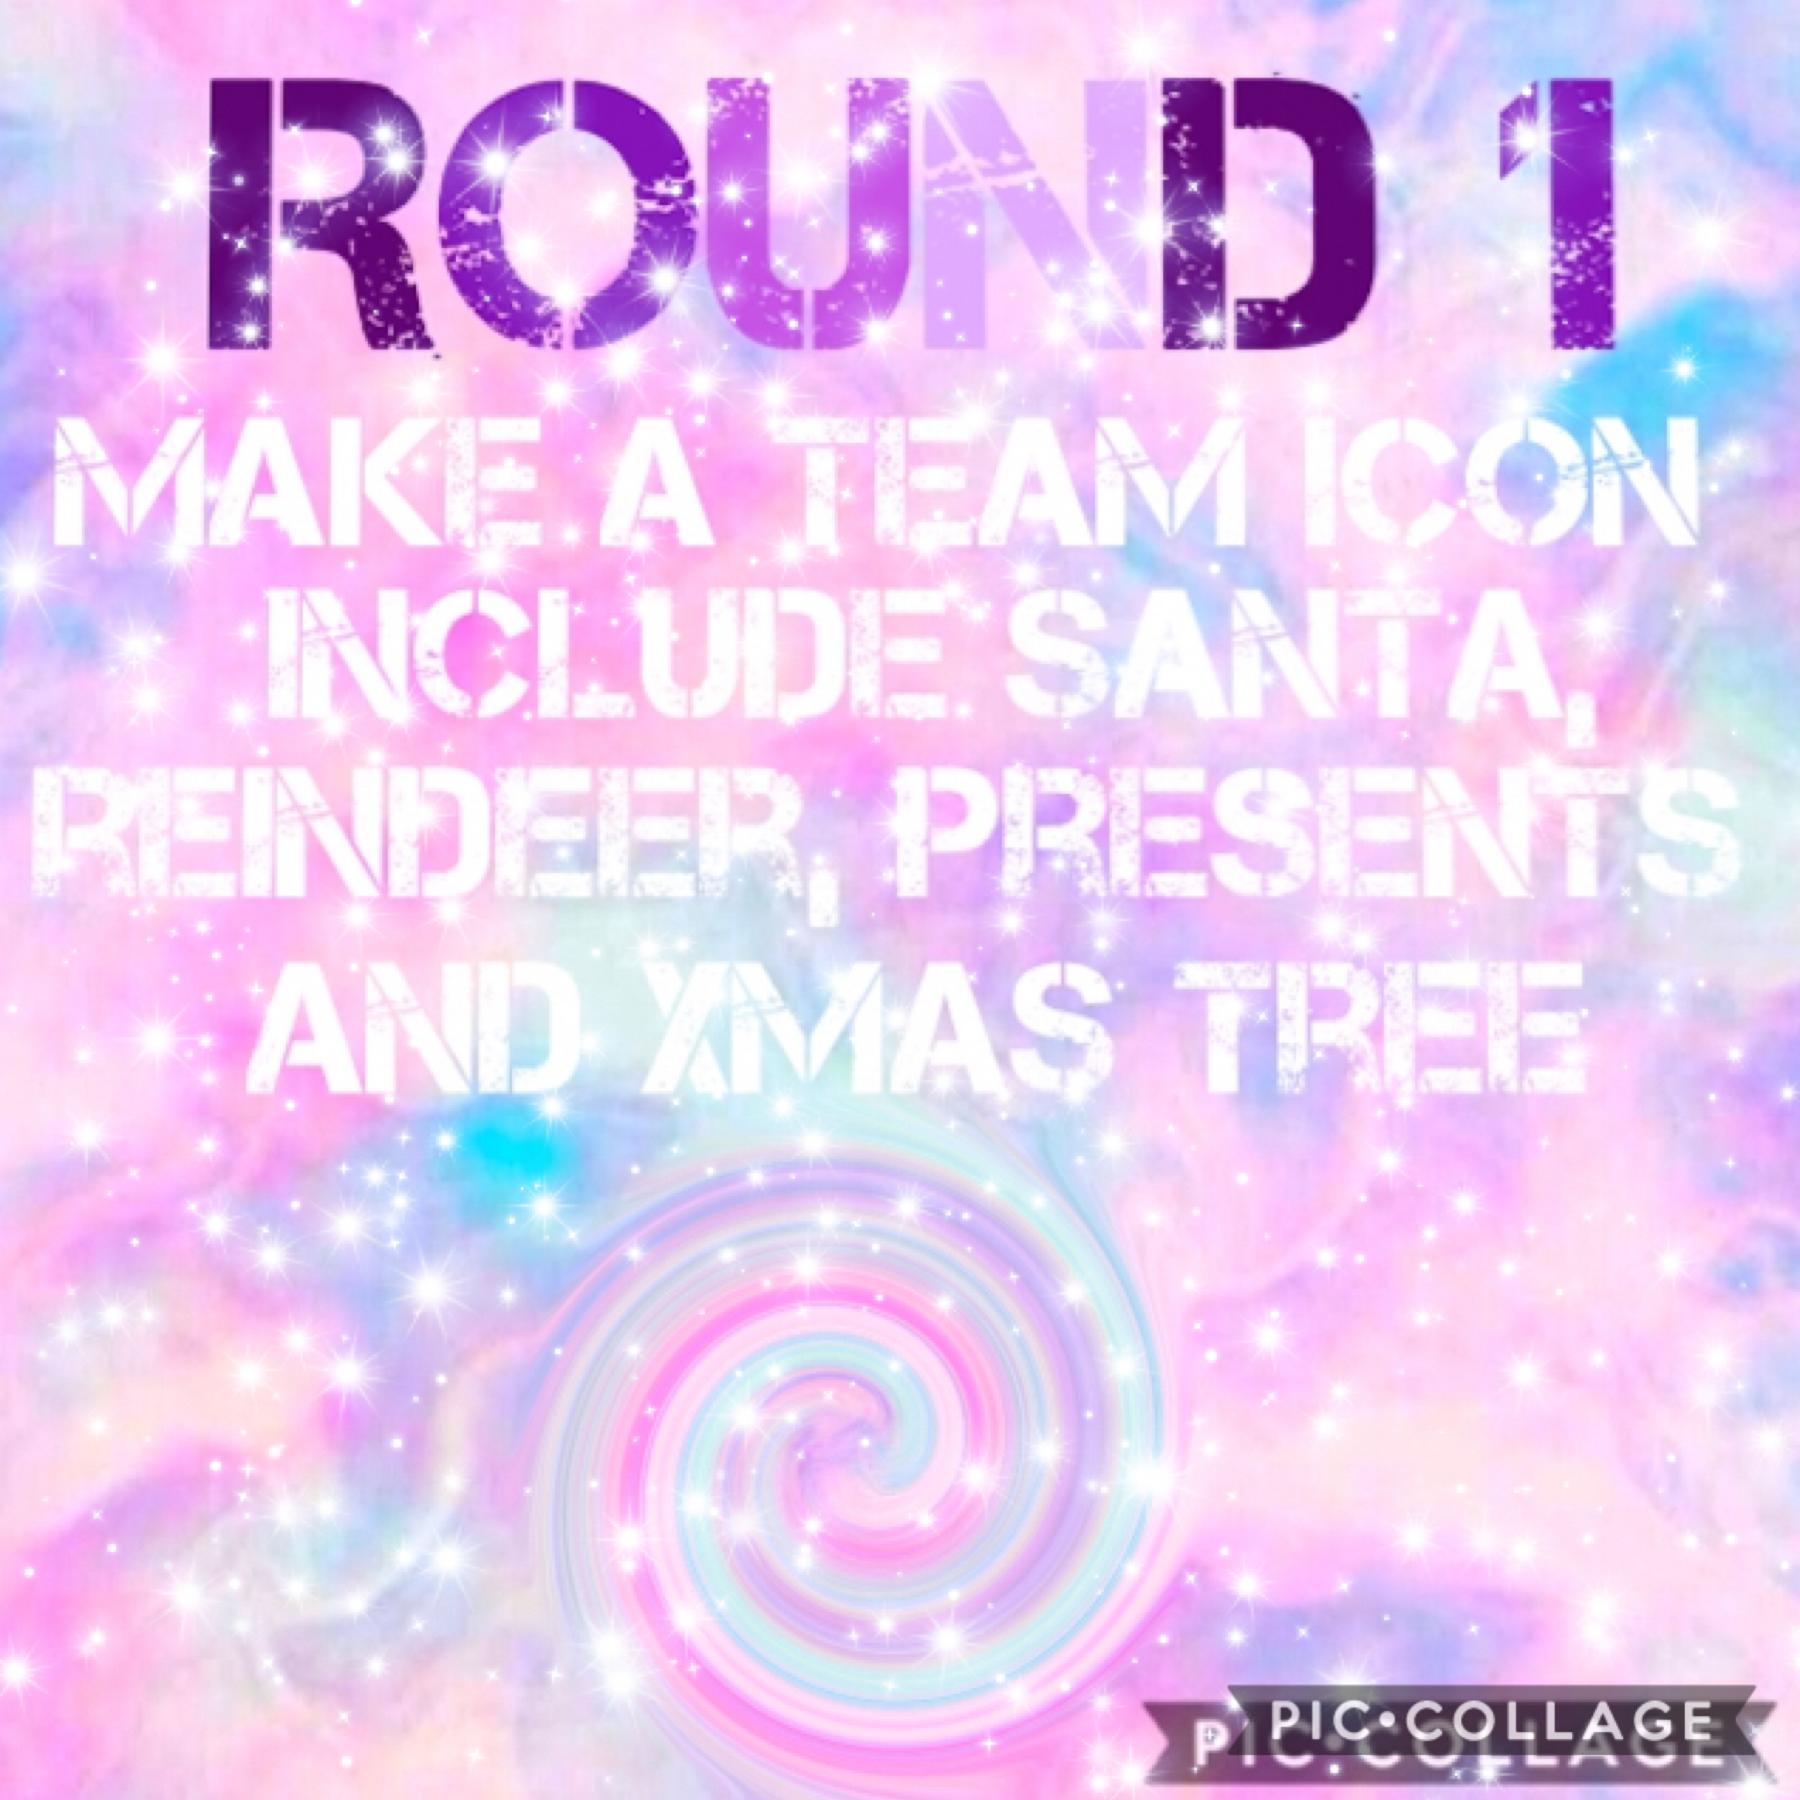 Sorry I’m late posting it but here is round 1 you will each get points for the icon you make and whoever has the most points will get the team icon and then whoever has the most points at the end will win so good luck!